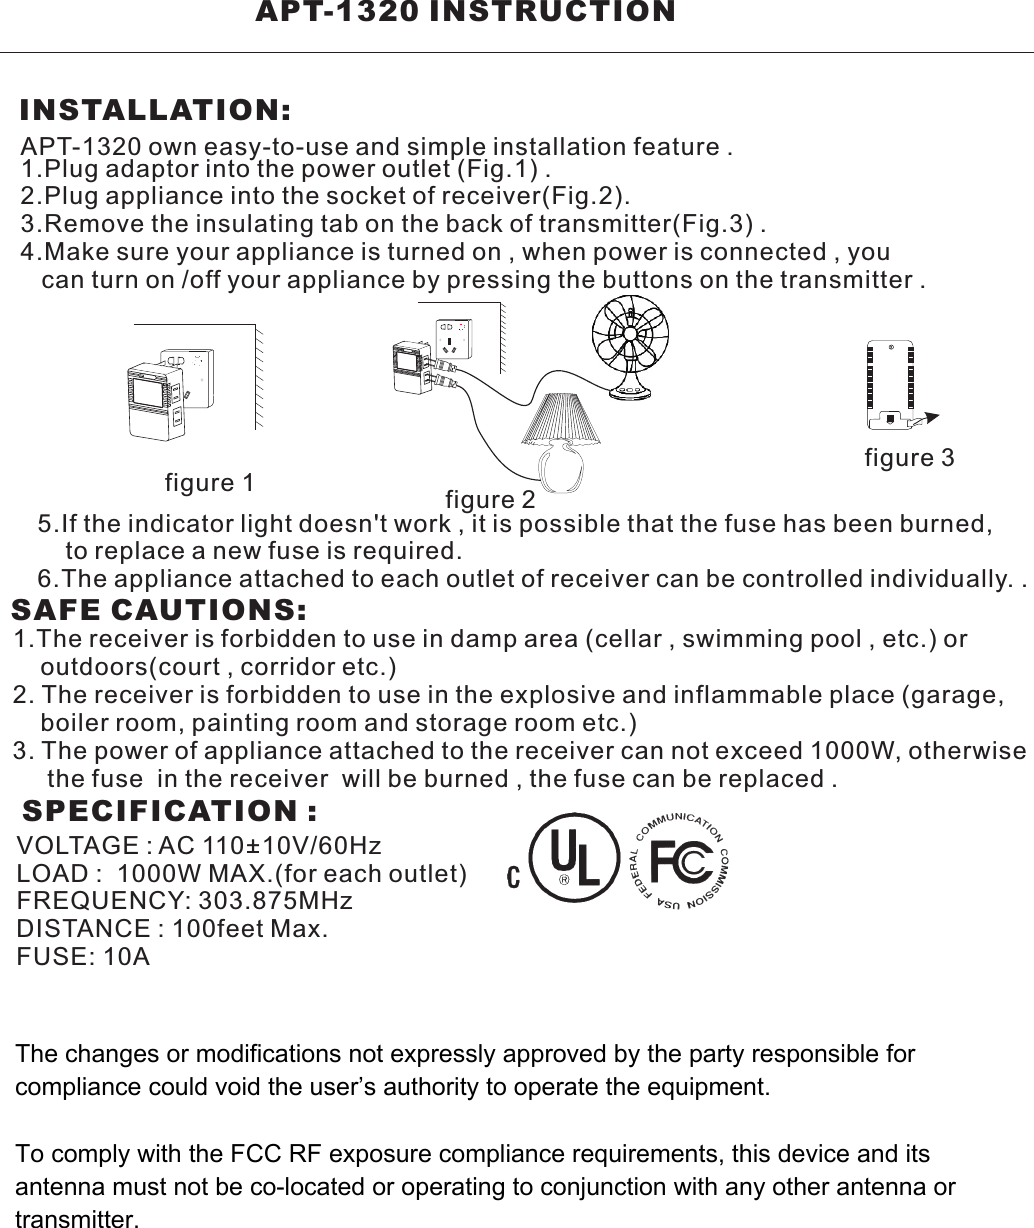                         APT-1320 INSTRUCTION                     INSTALLATION:APT-1320 own easy-to-use and simple installation feature .1.Plug adaptor into the power outlet (Fig.1) .2.Plug appliance into the socket of receiver(Fig.2).3.Remove the insulating tab on the back of transmitter(Fig.3) . 4.Make sure your appliance is turned on , when power is connected , you   can turn on /off your appliance by pressing the buttons on the transmitter .5.If the indicator light doesn&apos;t work , it is possible that the fuse has been burned,     to replace a new fuse is required.6.The appliance attached to each outlet of receiver can be controlled individually. .SAFE CAUTIONS:1.The receiver is forbidden to use in damp area (cellar , swimming pool , etc.) or     outdoors(court , corridor etc.)2. The receiver is forbidden to use in the explosive and inflammable place (garage,     boiler room, painting room and storage room etc.)3. The power of appliance attached to the receiver can not exceed 1000W, otherwise     the fuse  in the receiver  will be burned , the fuse can be replaced .SPECIFICATION :VOLTAGE : AC 110+10V/60HzLOAD :  1000W MAX.(for each outlet)FREQUENCY: 303.875MHzDISTANCE : 100feet Max.FUSE: 10Afigure 1 figure 2figure 3The changes or modifications not expressly approved by the party responsible for compliance could void the user’s authority to operate the equipment.To comply with the FCC RF exposure compliance requirements, this device and its antenna must not be co-located or operating to conjunction with any other antenna or transmitter.